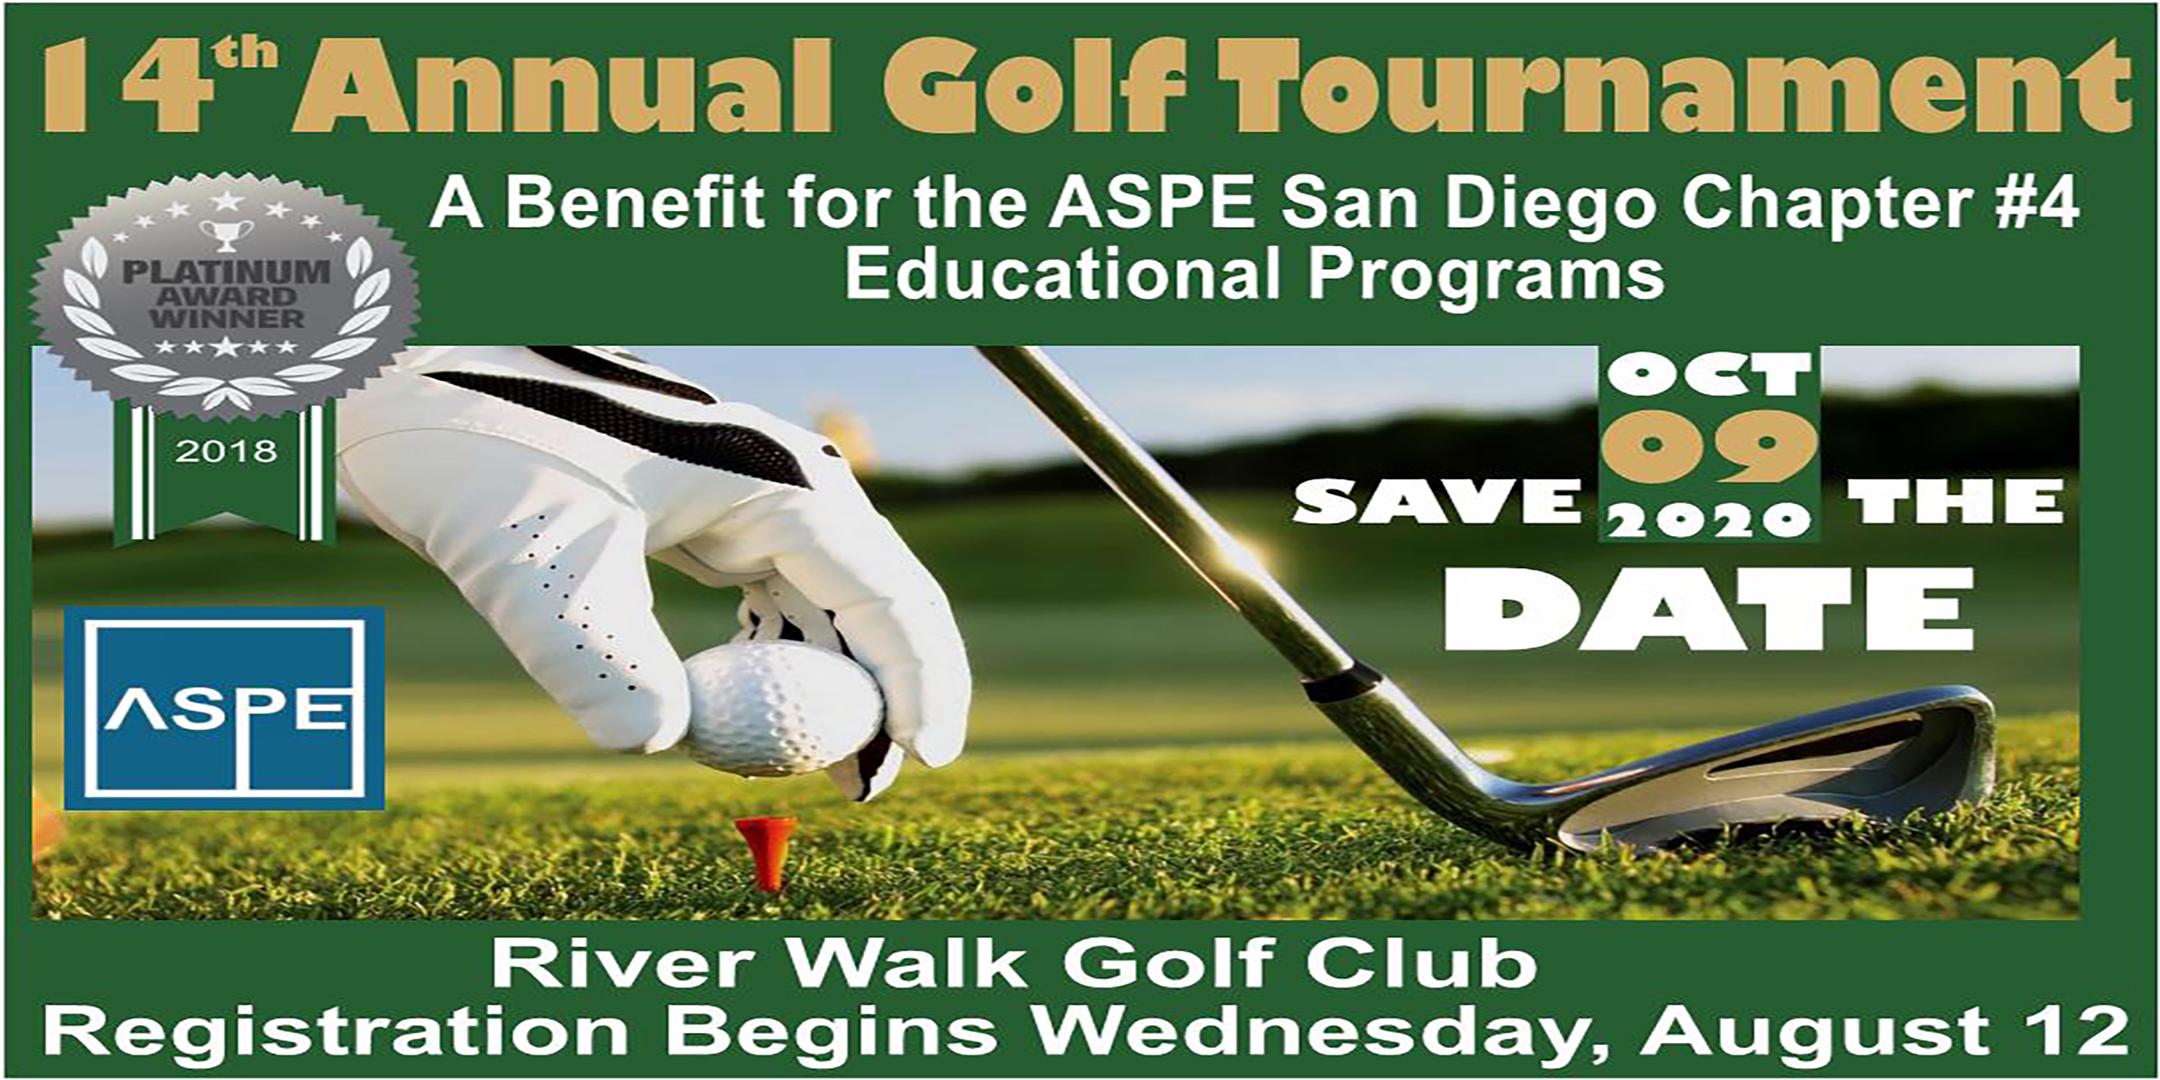 Save the Date for Our 14th Annual Golf Tournament!